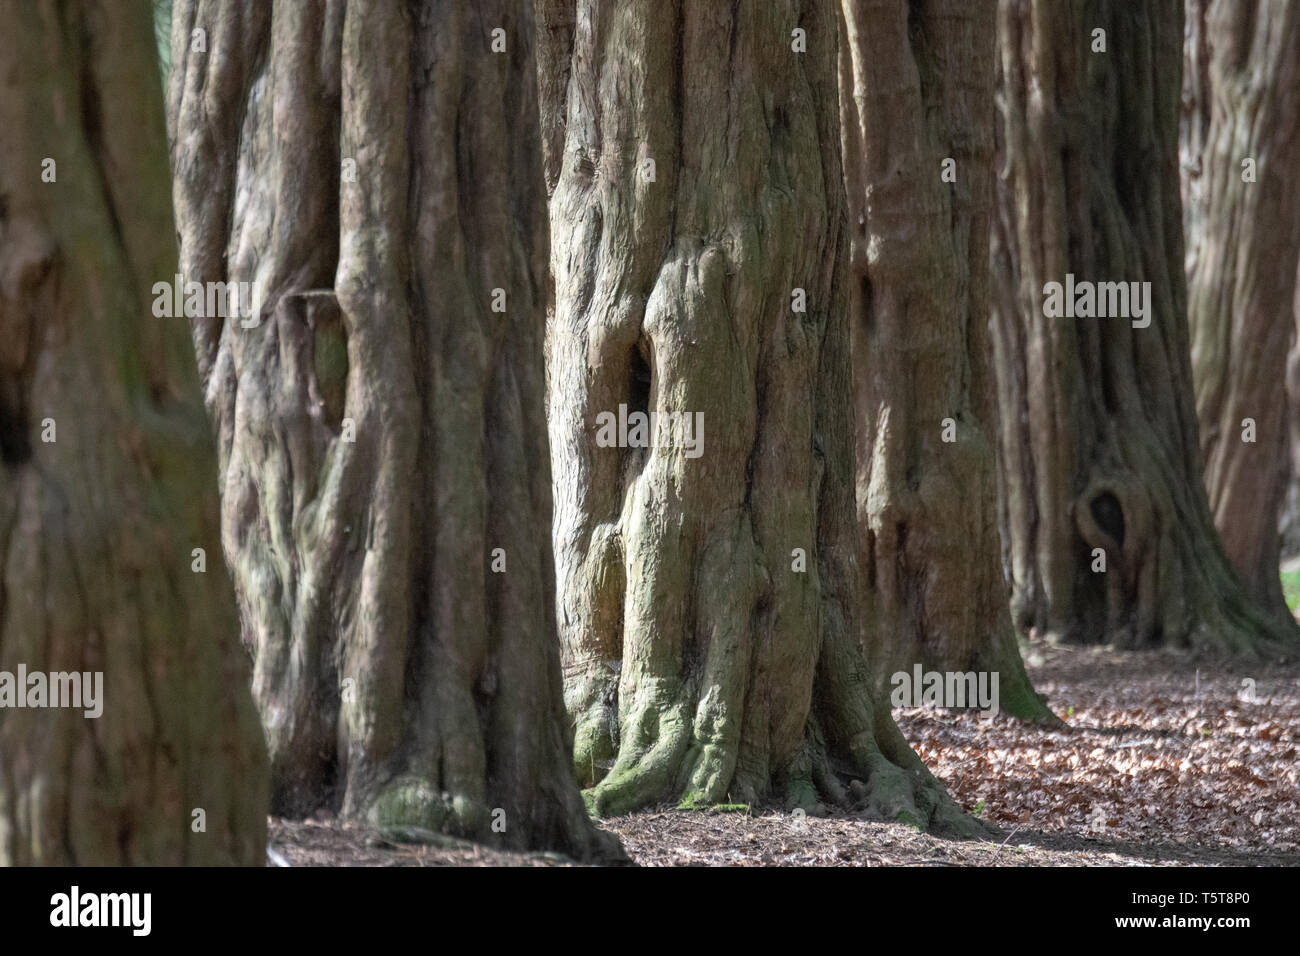 Yew trees (Taxus baccata) Foto Stock